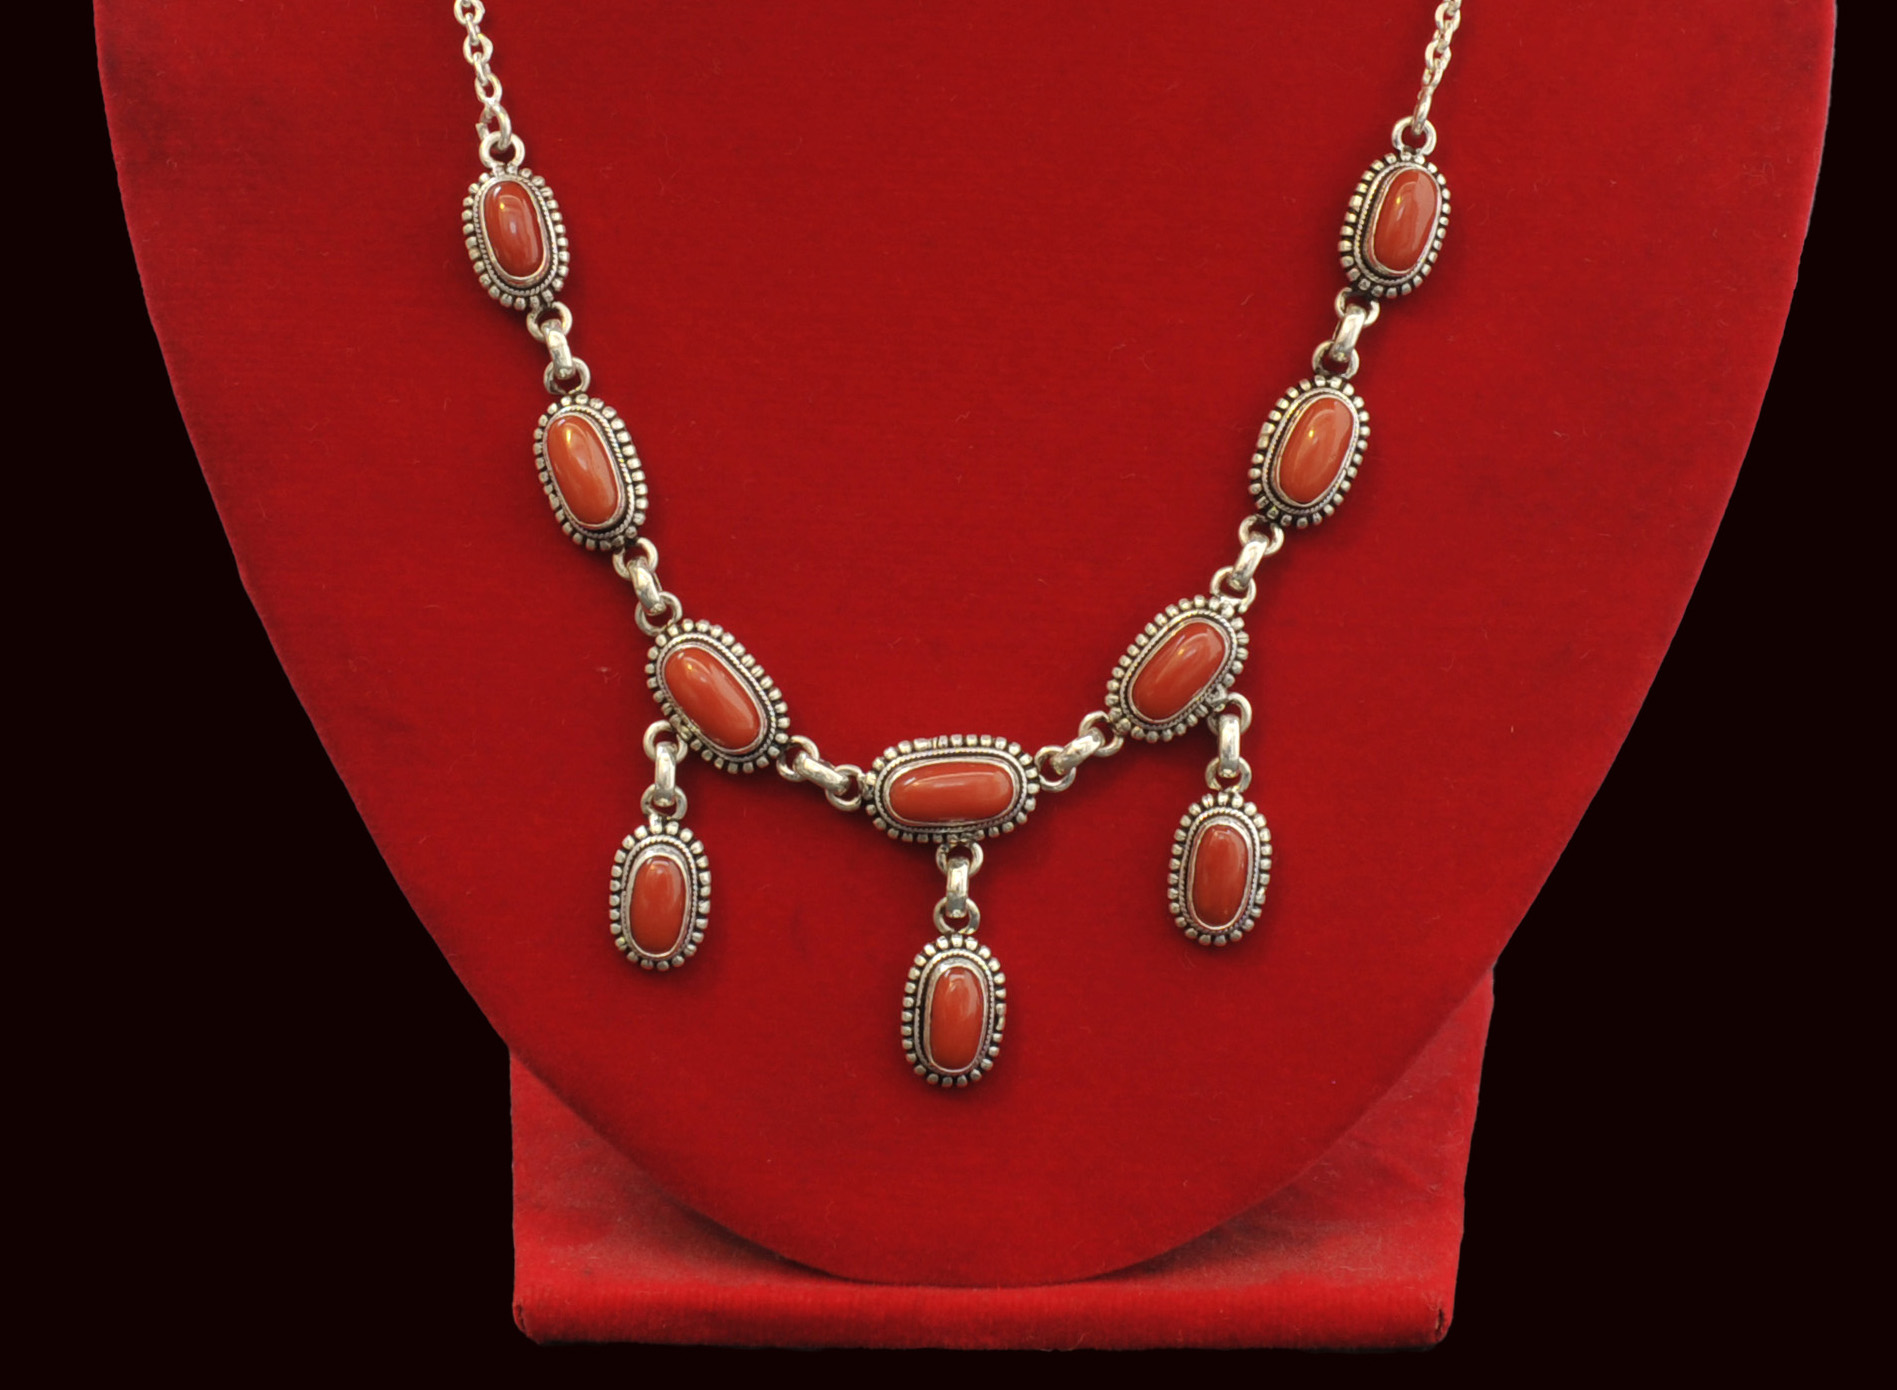 Designer Silver Necklace Of Seven Red Stone In A Row And Three Below Design (red Coral).